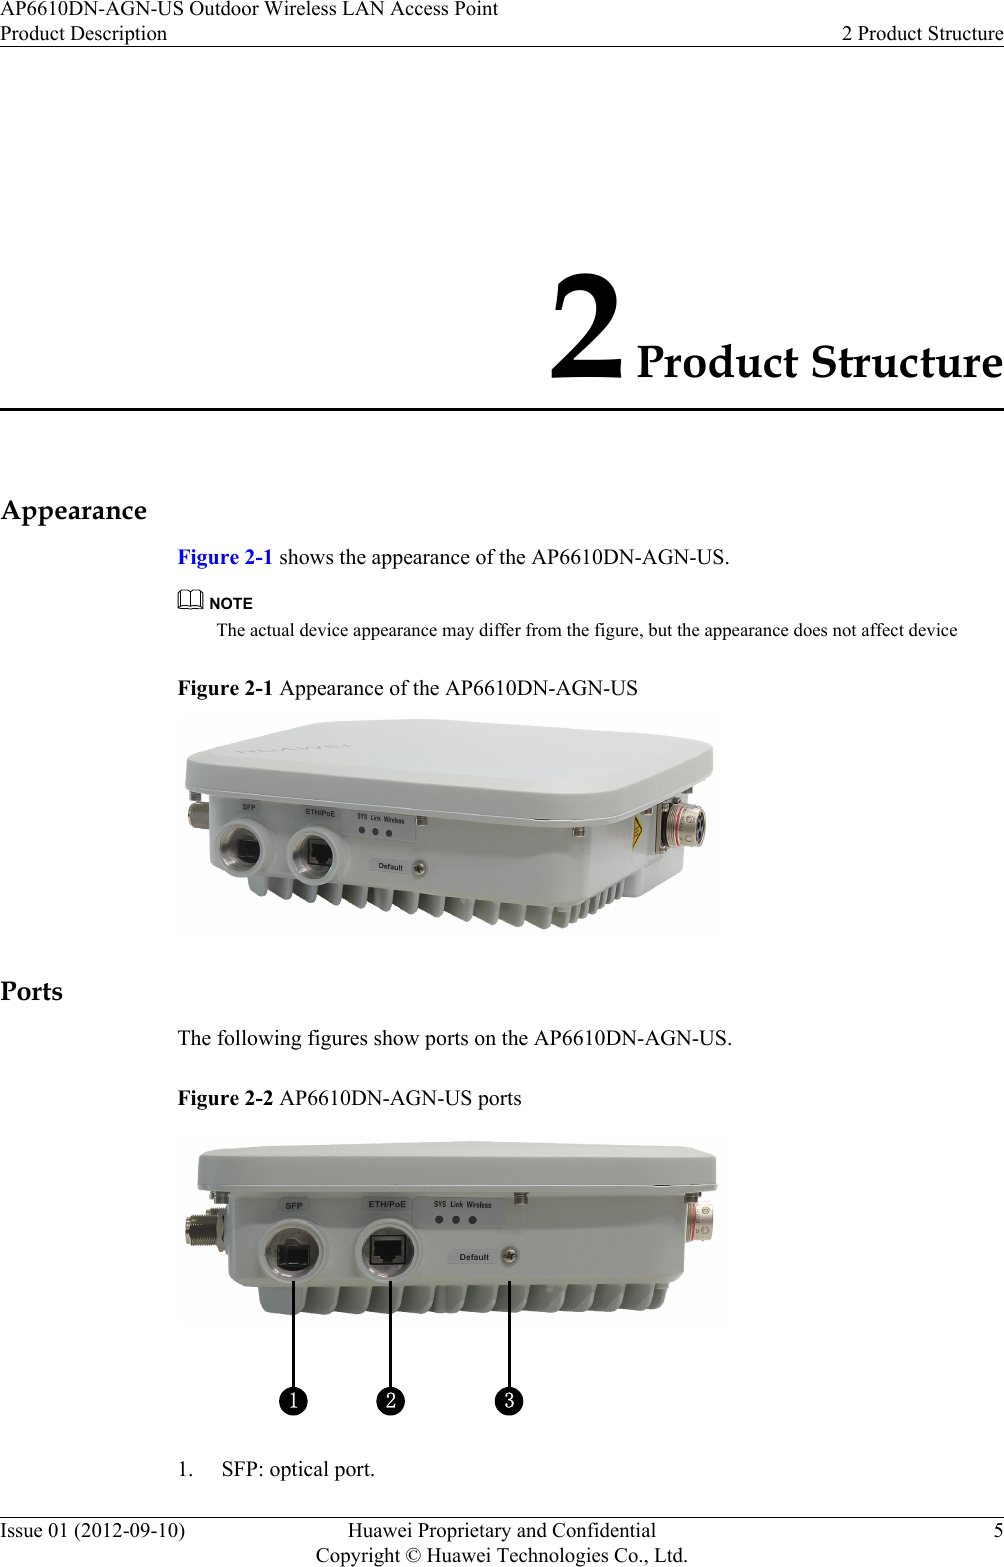 2 Product StructureAppearanceFigure 2-1 shows the appearance of the AP6610DN-AGN-US.NOTEThe actual device appearance may differ from the figure, but the appearance does not affect deviceFigure 2-1 Appearance of the AP6610DN-AGN-USPortsThe following figures show ports on the AP6610DN-AGN-US.Figure 2-2 AP6610DN-AGN-US ports1 2 31. SFP: optical port.AP6610DN-AGN-US Outdoor Wireless LAN Access PointProduct Description 2 Product StructureIssue 01 (2012-09-10) Huawei Proprietary and ConfidentialCopyright © Huawei Technologies Co., Ltd.5